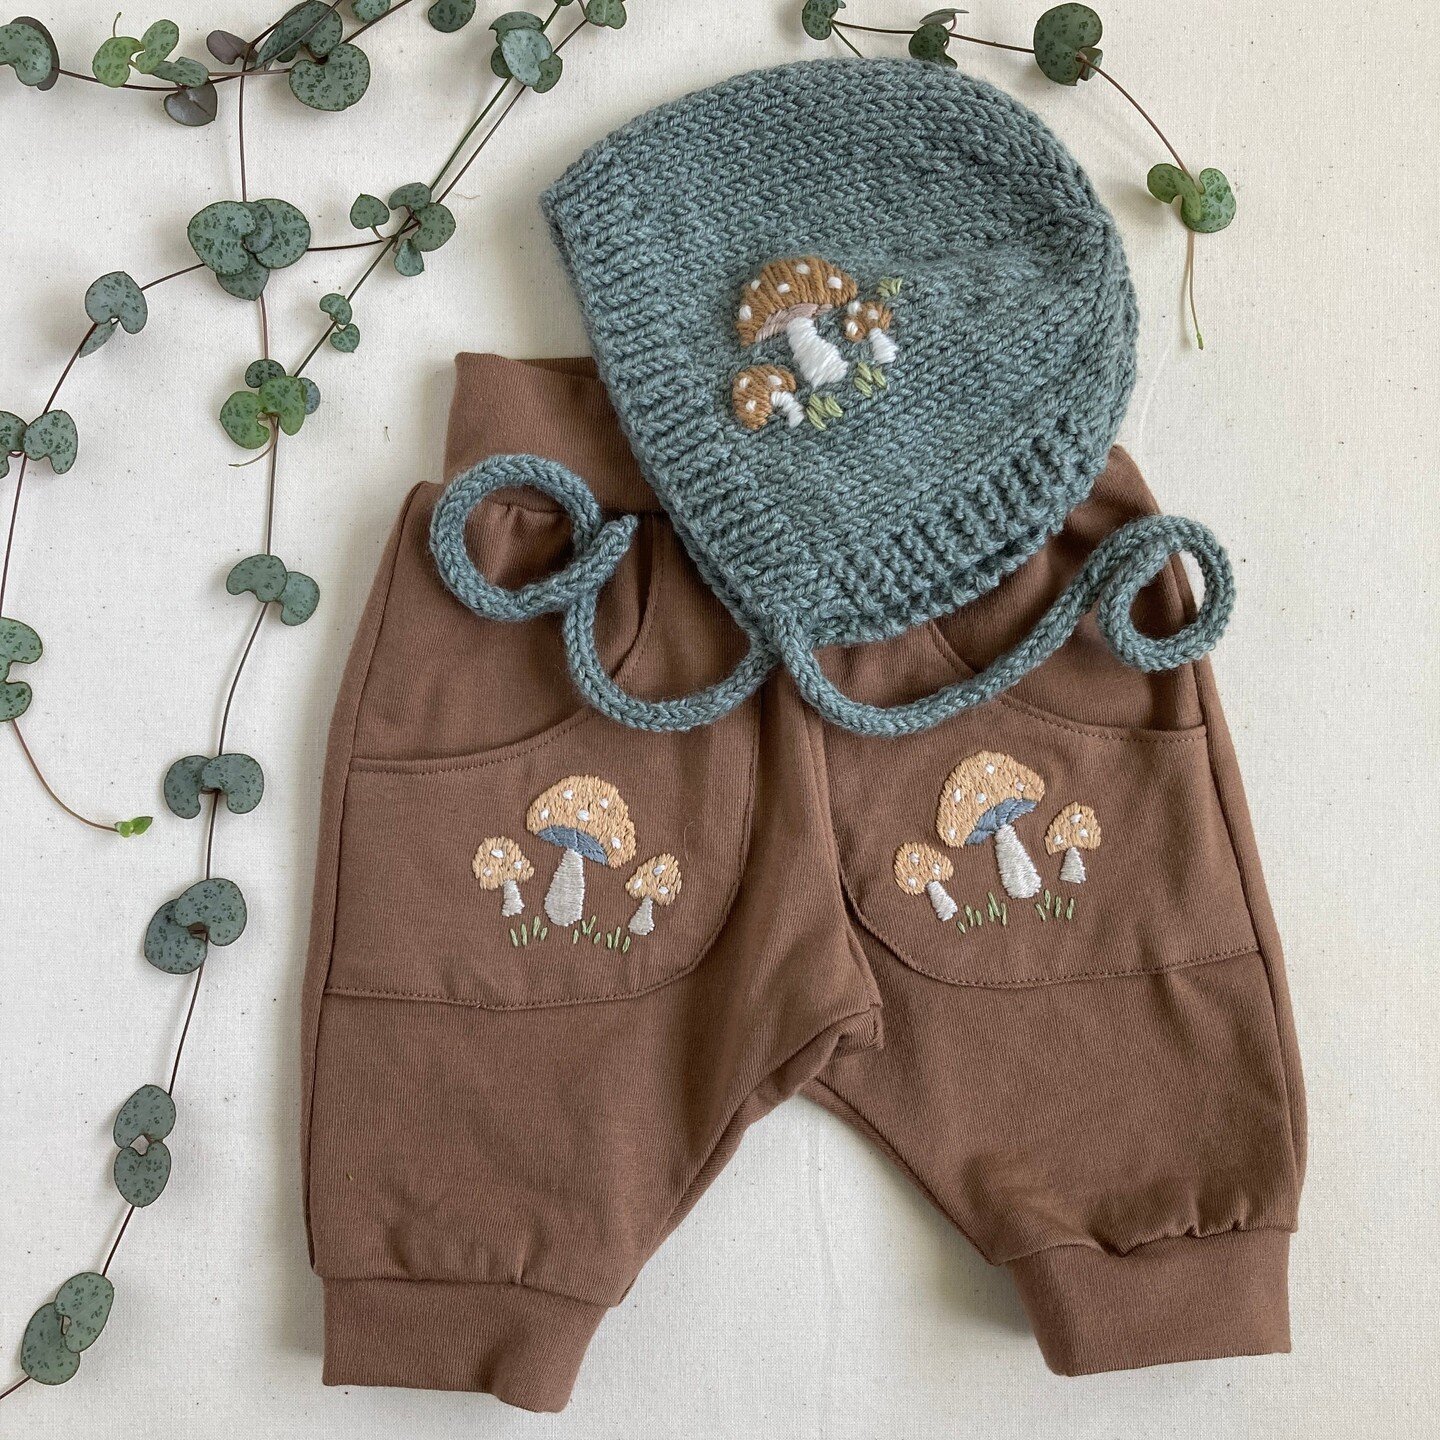 Toadstool embroidery on both a bonnet and handmade baby joggers. As I made the joggers myself, I embroidered the pockets first before I attached them, but it&rsquo;s also easy enough to embroider them on the pockets of store bought items. You could u